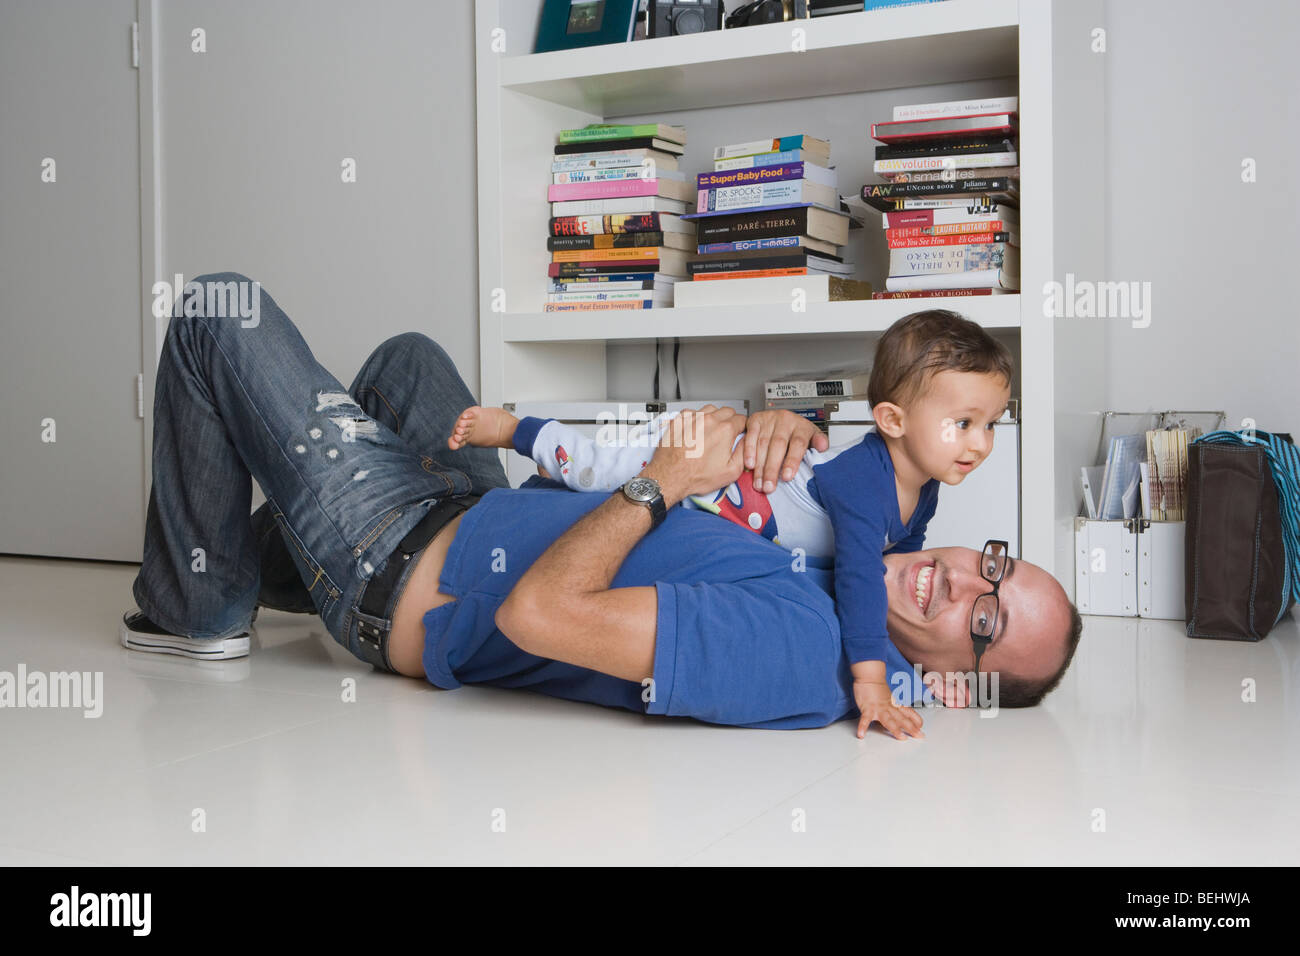 Man playing with his son Stock Photo